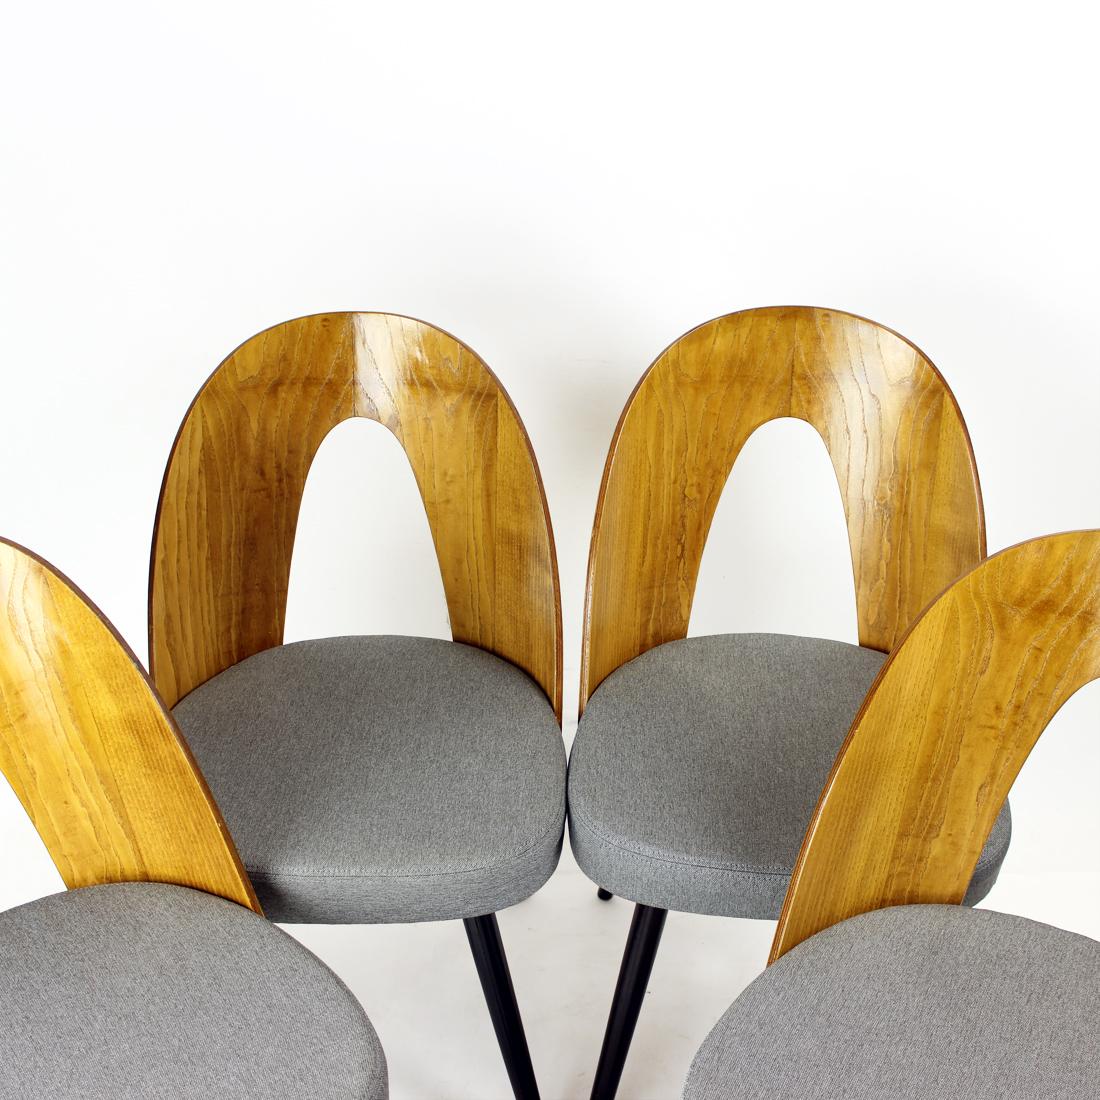 Iconic Tatra Chairs In Oak & Fabric By Antonin Šuman, Tatra 1960s In Excellent Condition For Sale In Zohor, SK